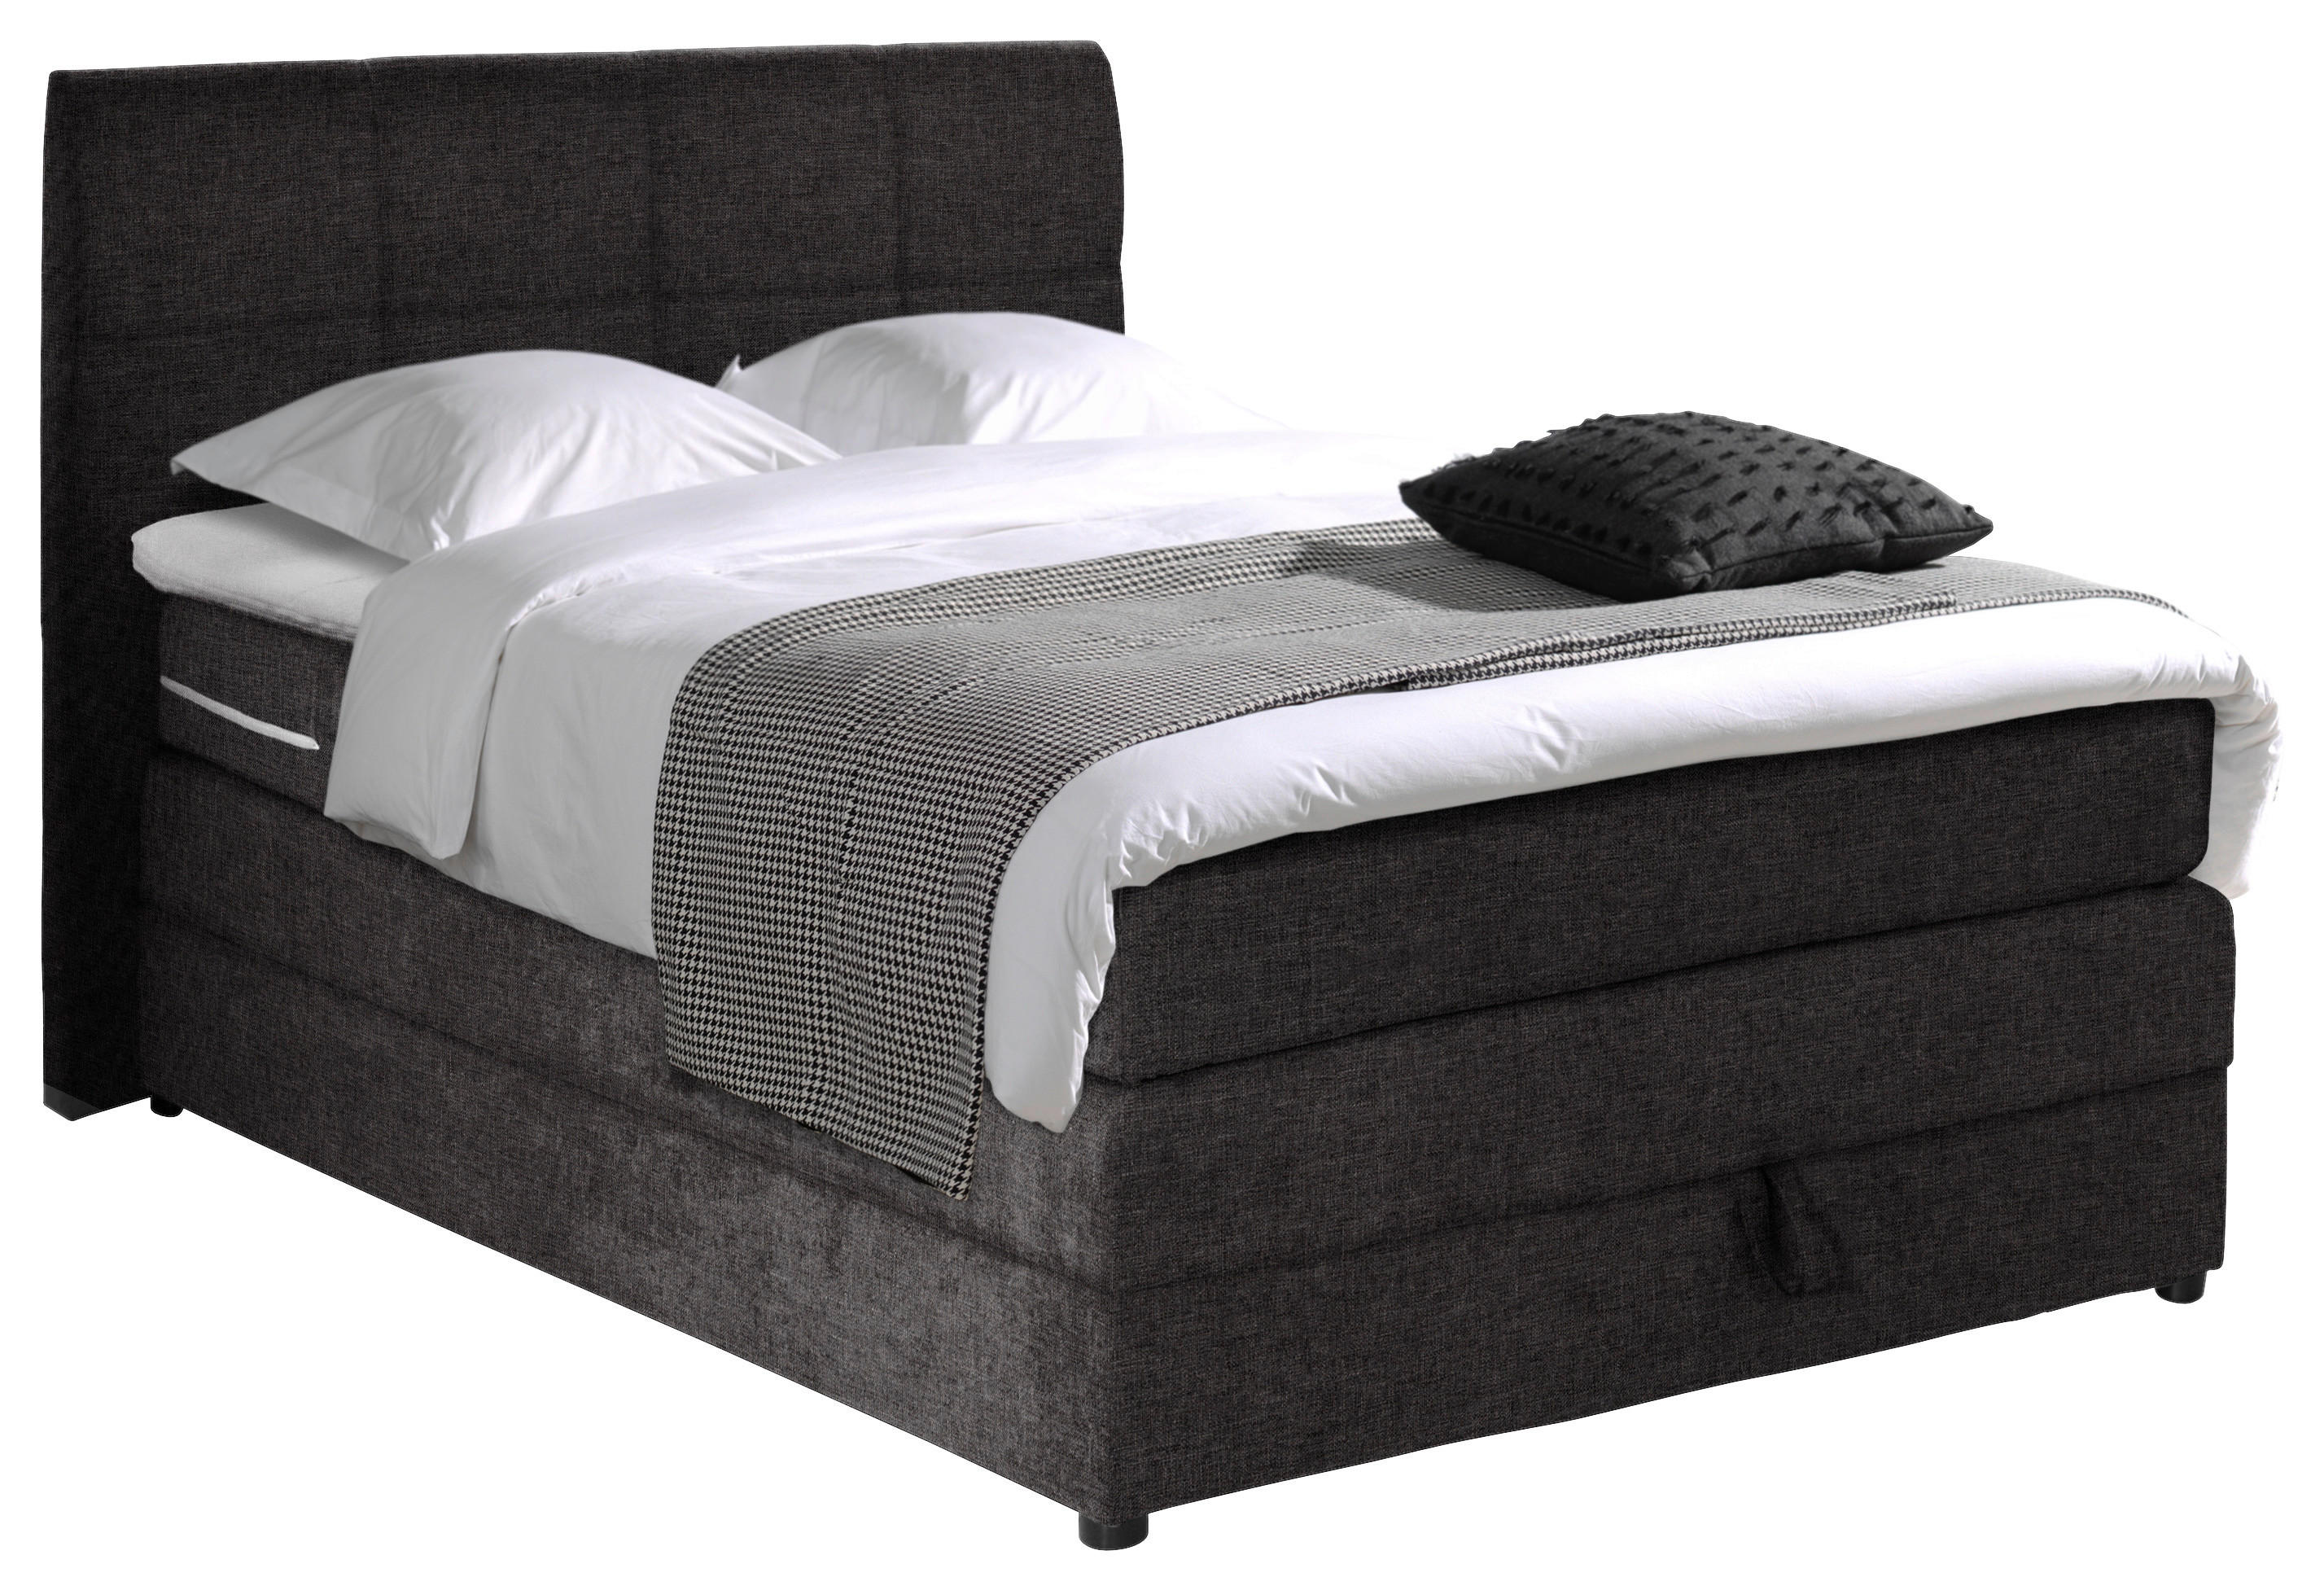 BOXSPRING-ÁGY 120/200 cm  Antracit  - Antracit/Fekete, Modern, Műanyag/Fa (120/200cm) - MID.YOU